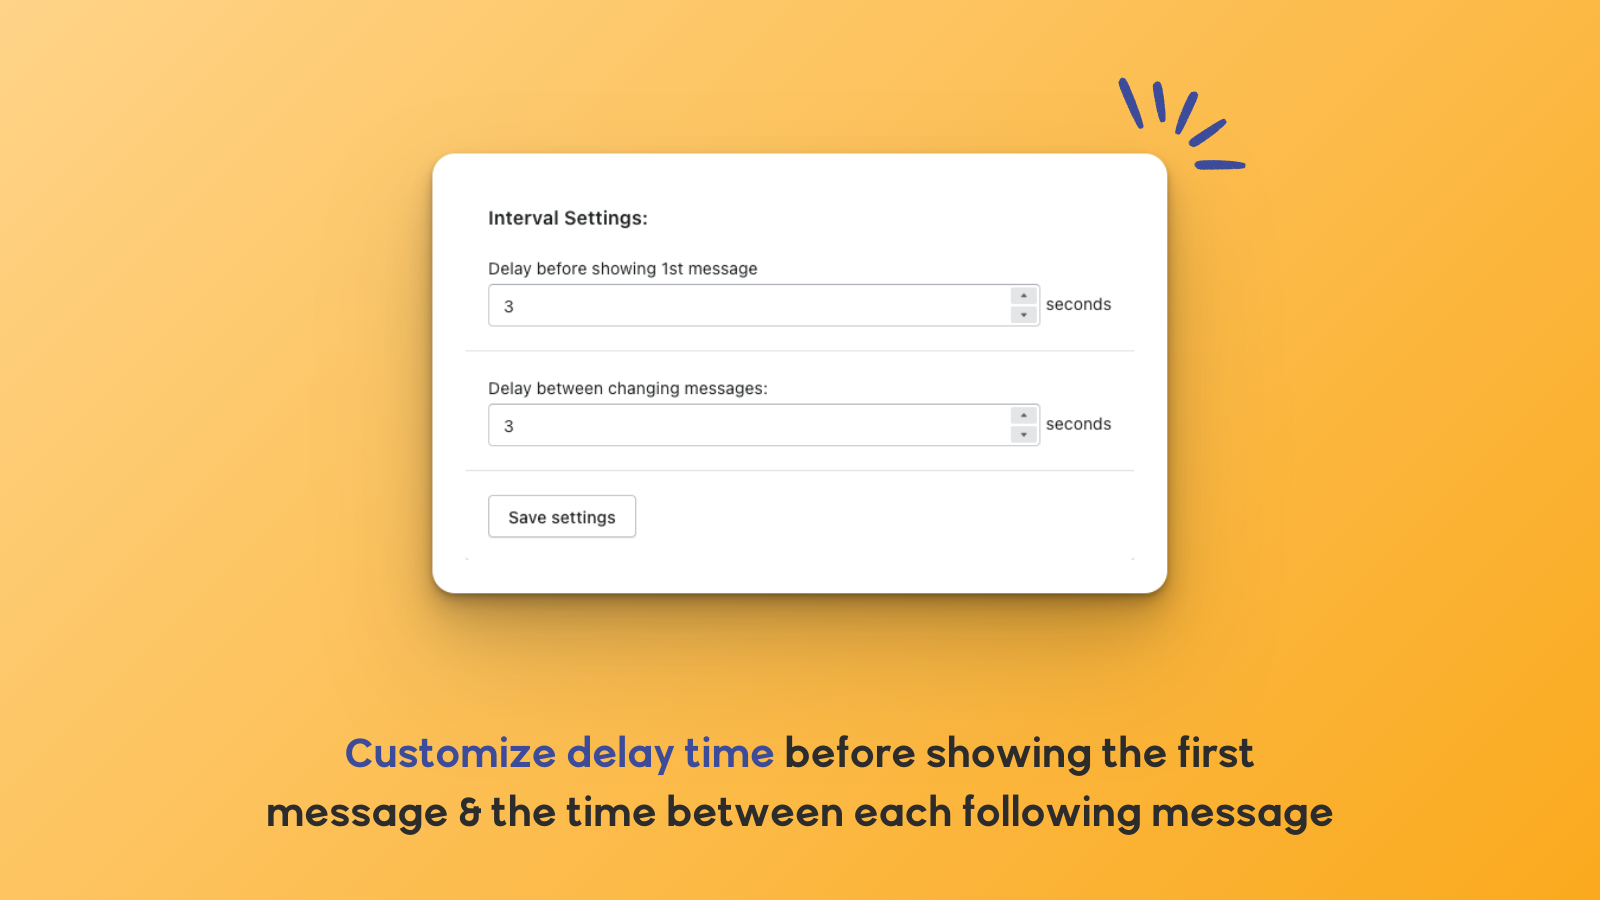 Customize delay time before 1st message and between each message